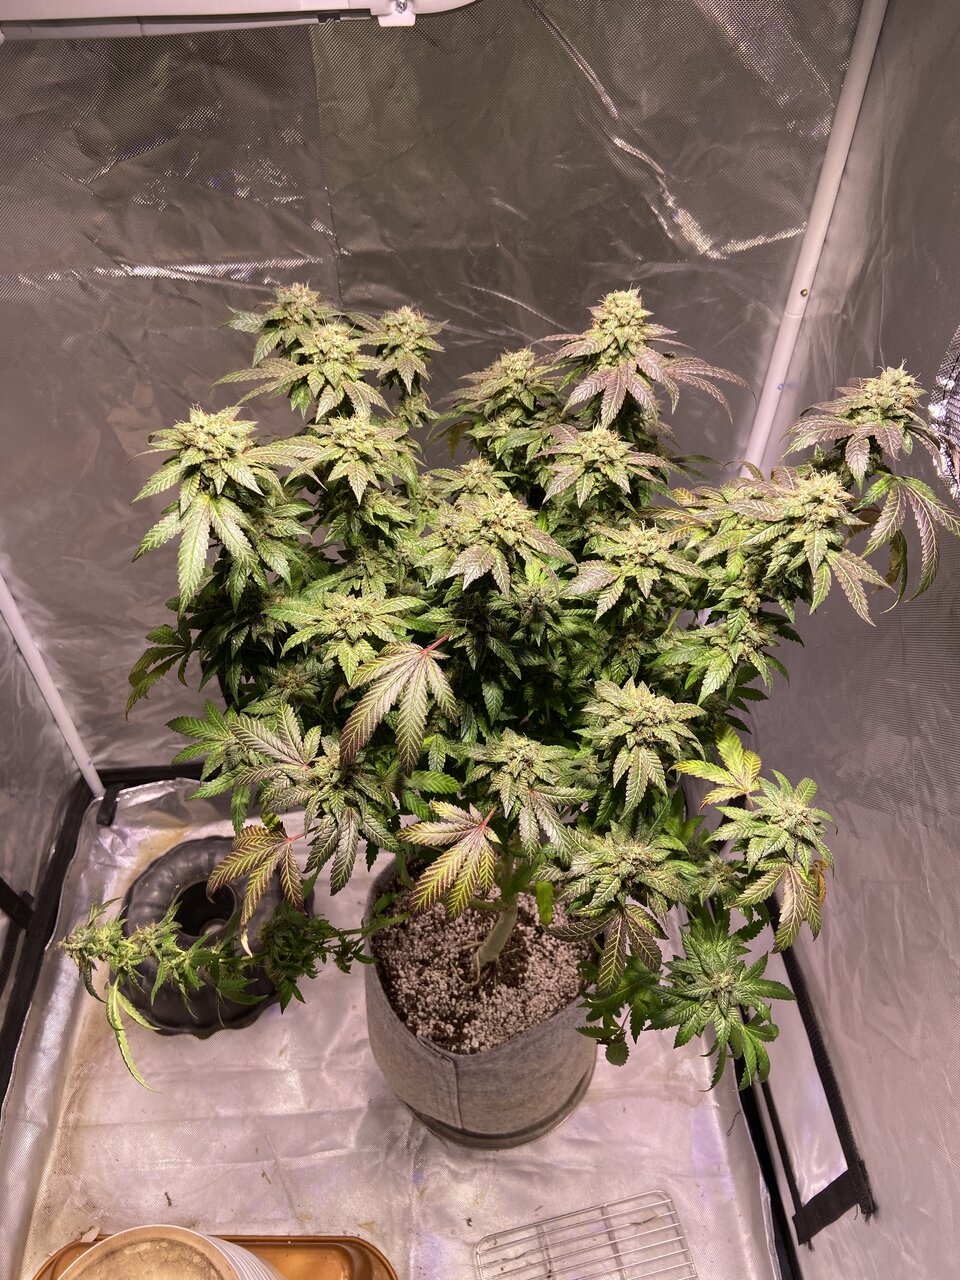 gasfruit day 57